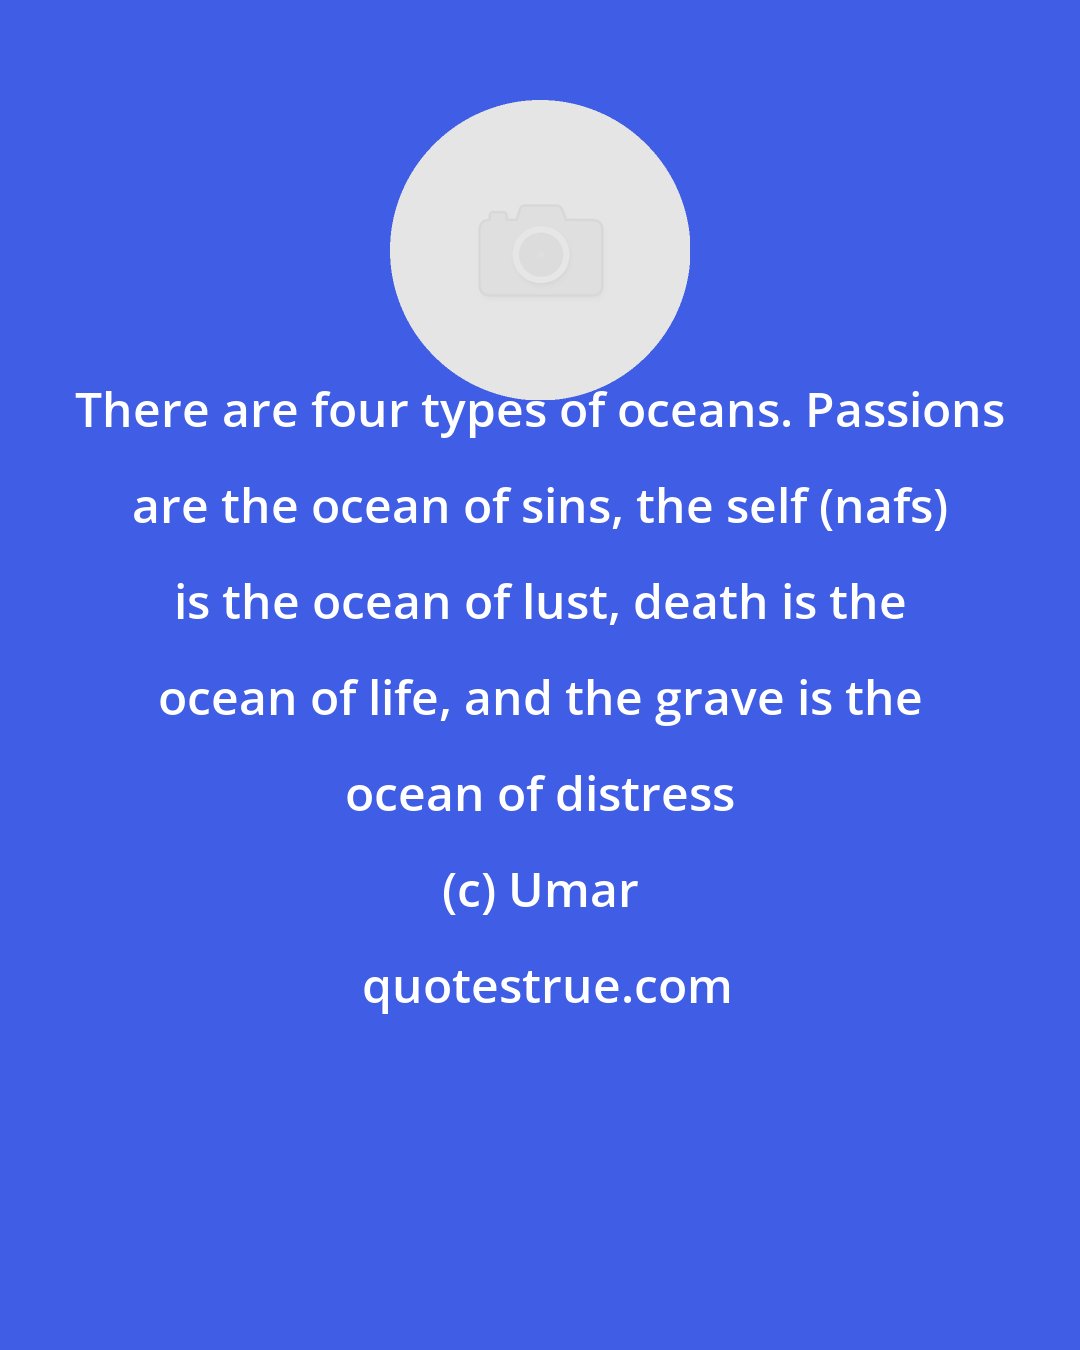 Umar: There are four types of oceans. Passions are the ocean of sins, the self (nafs) is the ocean of lust, death is the ocean of life, and the grave is the ocean of distress